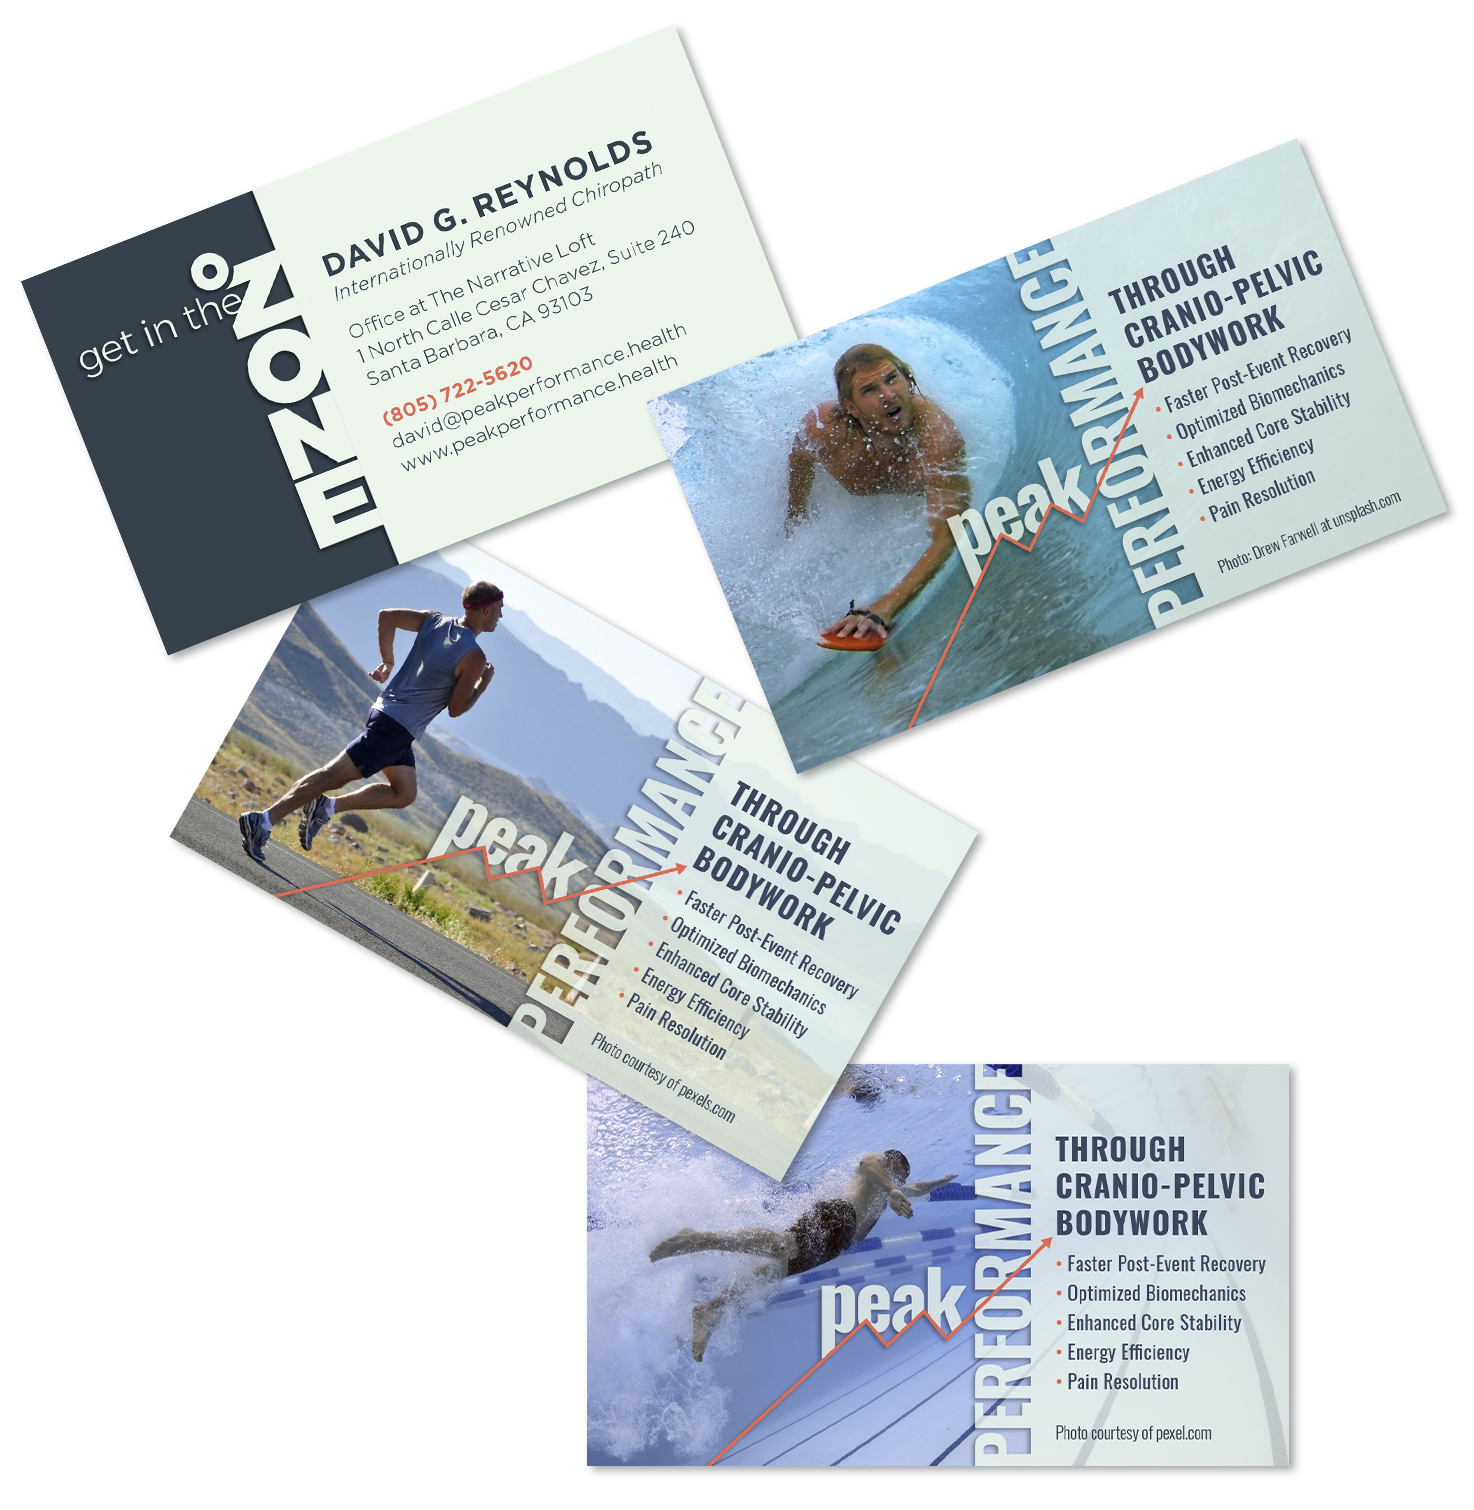 Peak Performance Business Cards, Varied Imagery on Reverse Side